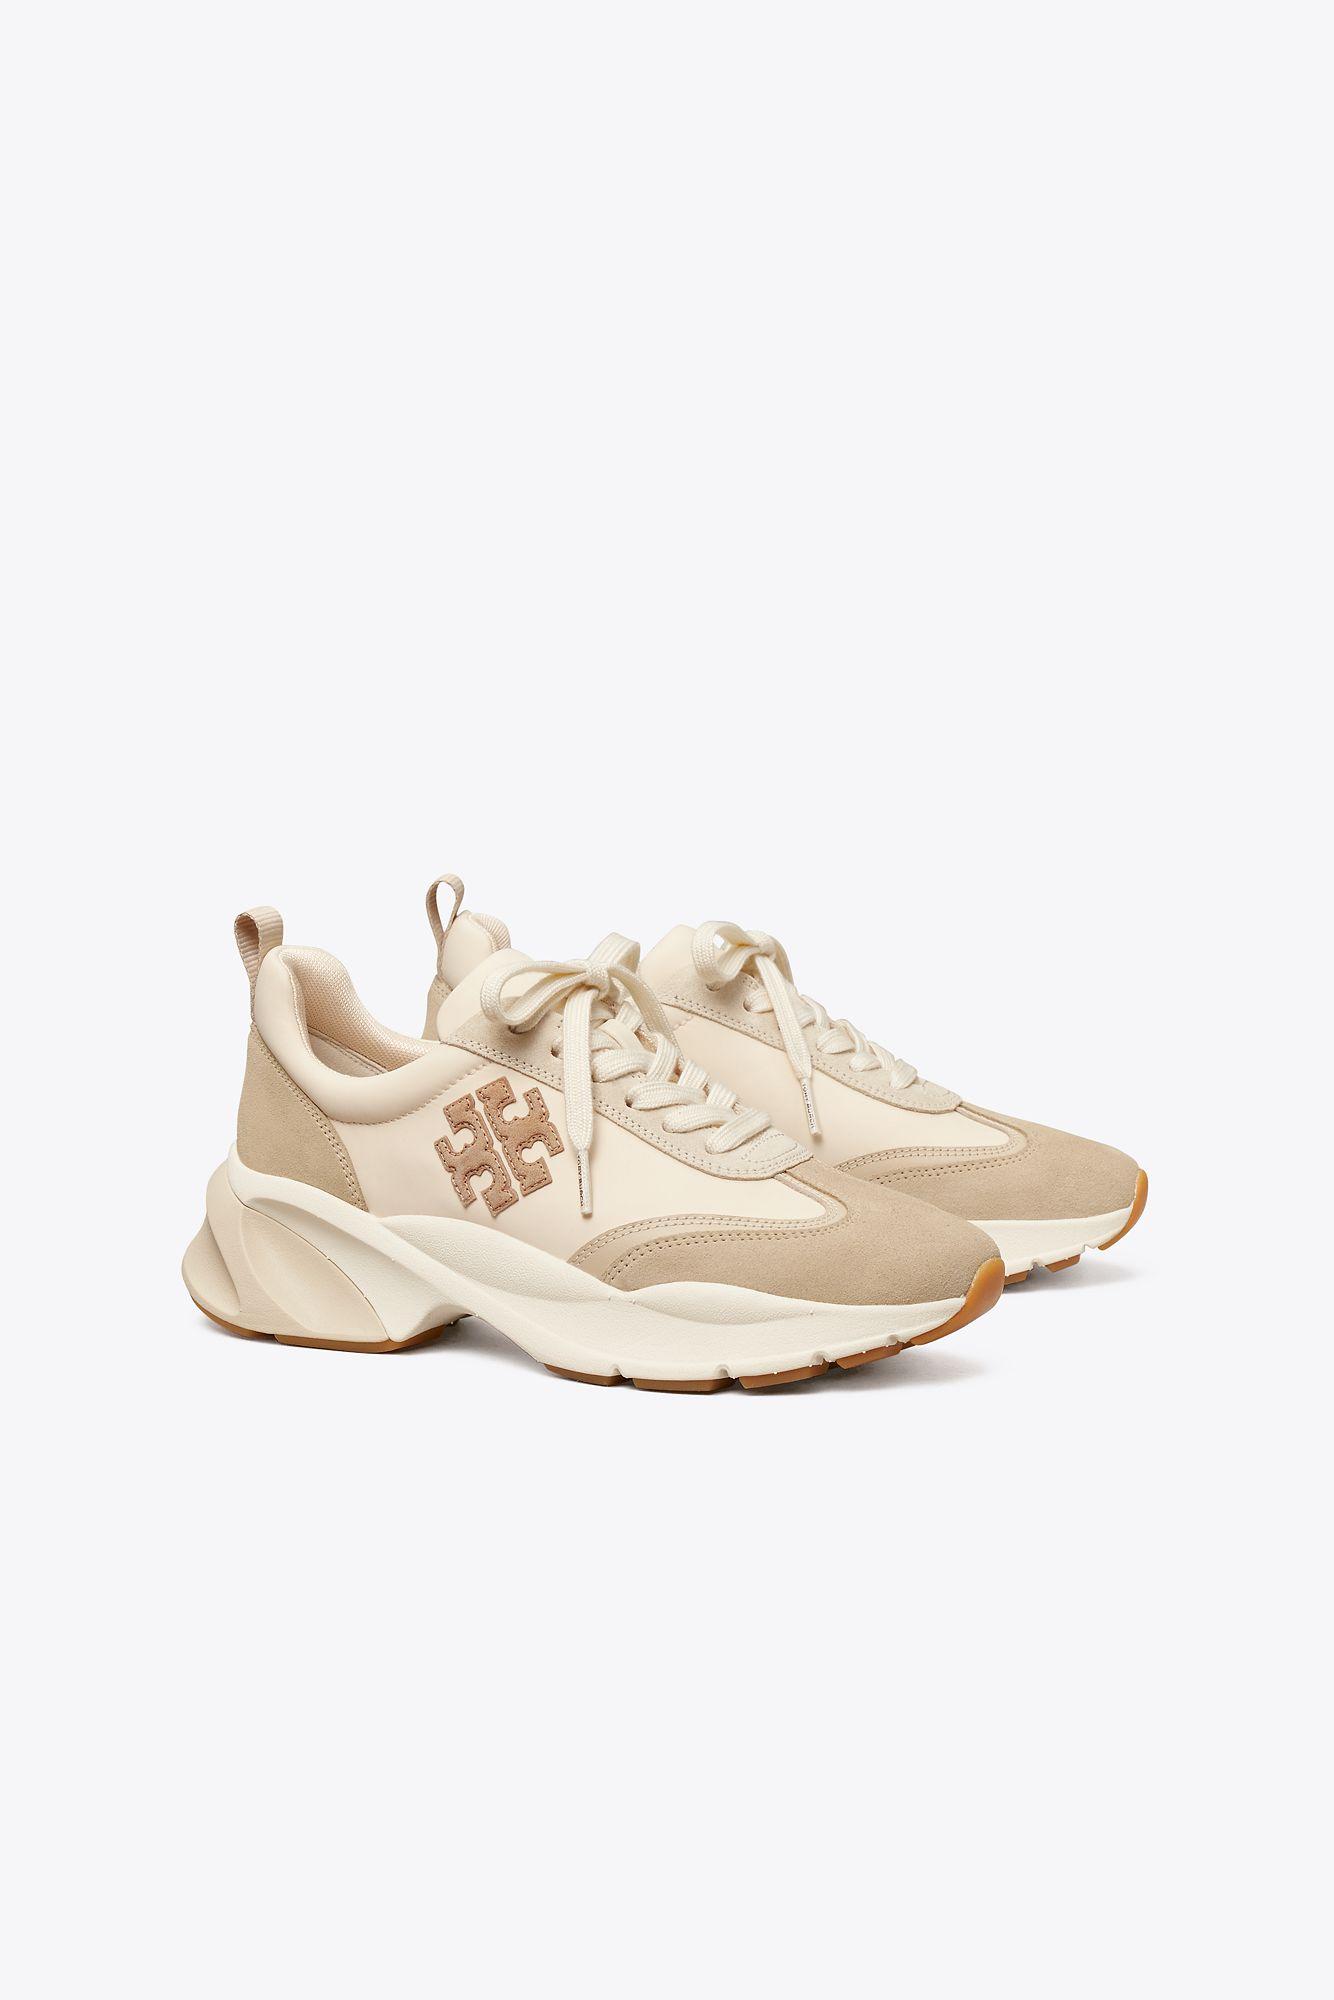 Tory Burch Good Luck Trainer in White | Lyst